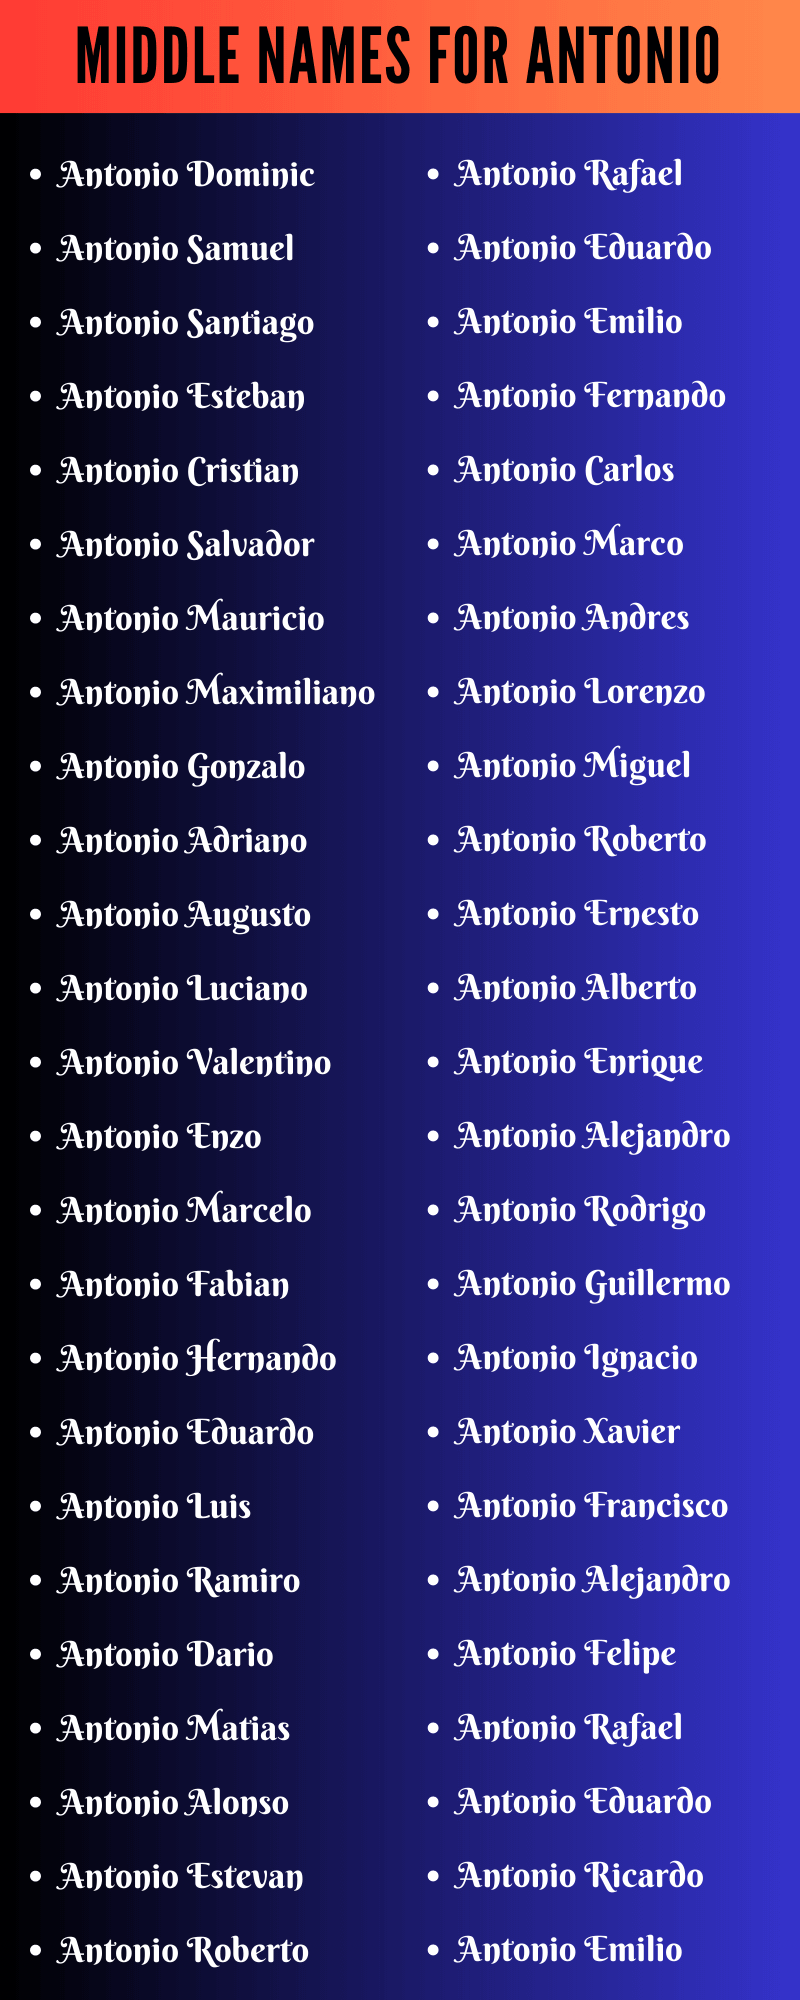 Middle Names For Antonio